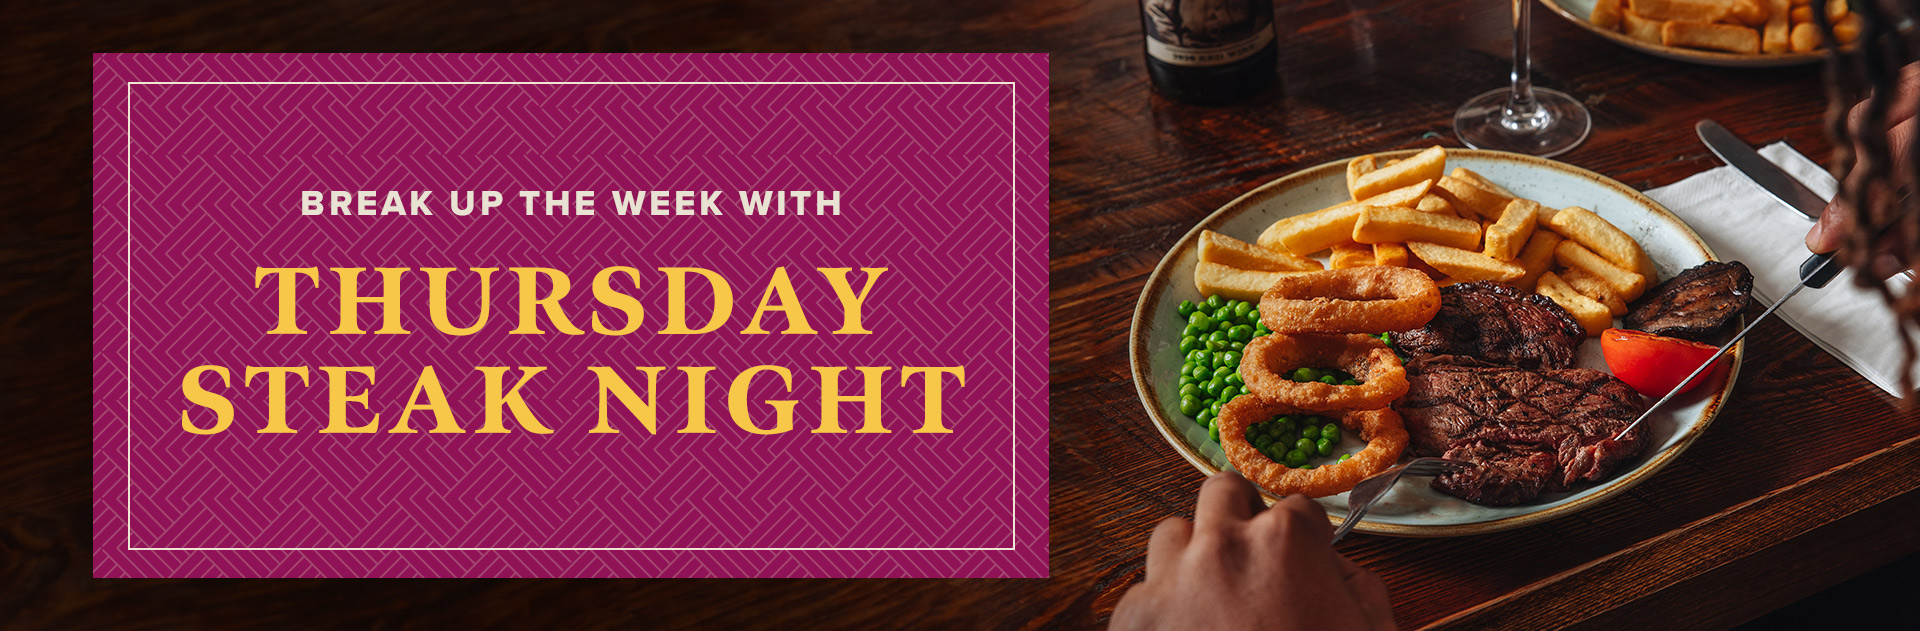 Thursday Steak Night at The Greave Dunning